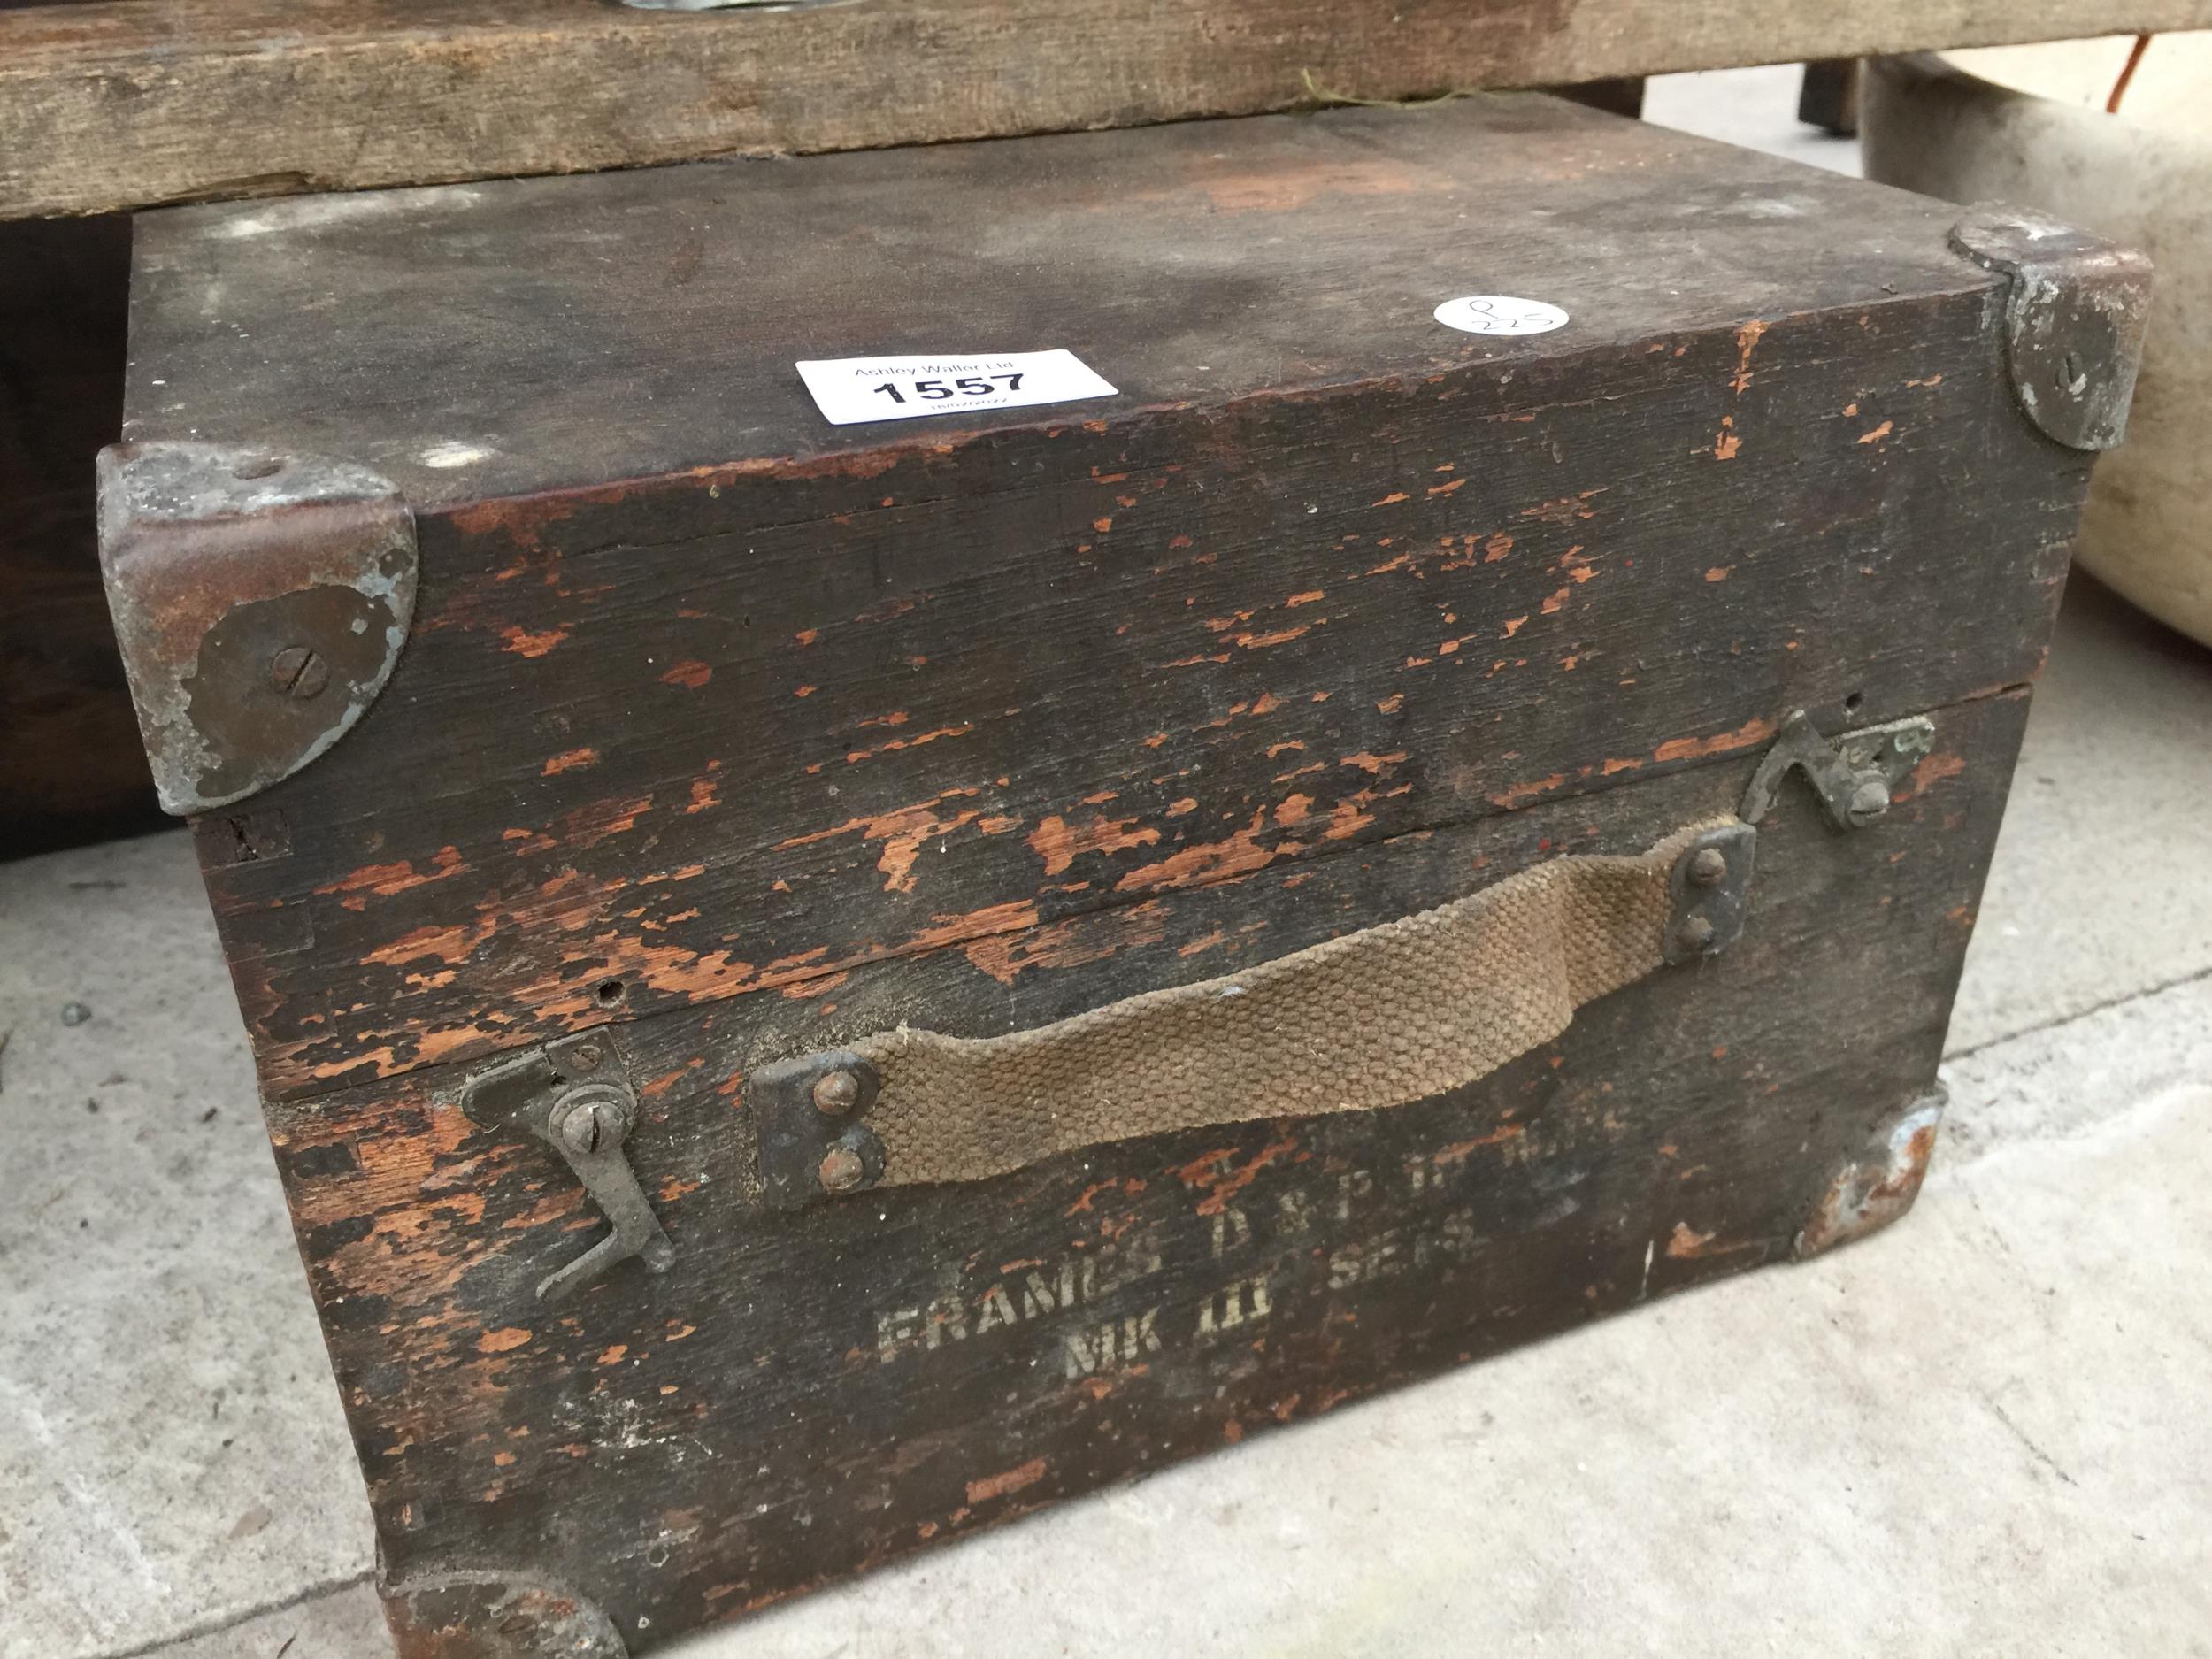 TWO VINTAGE WOODEN TOOL CHESTS AND A VINTAGE SPIRIT LEVEL - Image 2 of 4